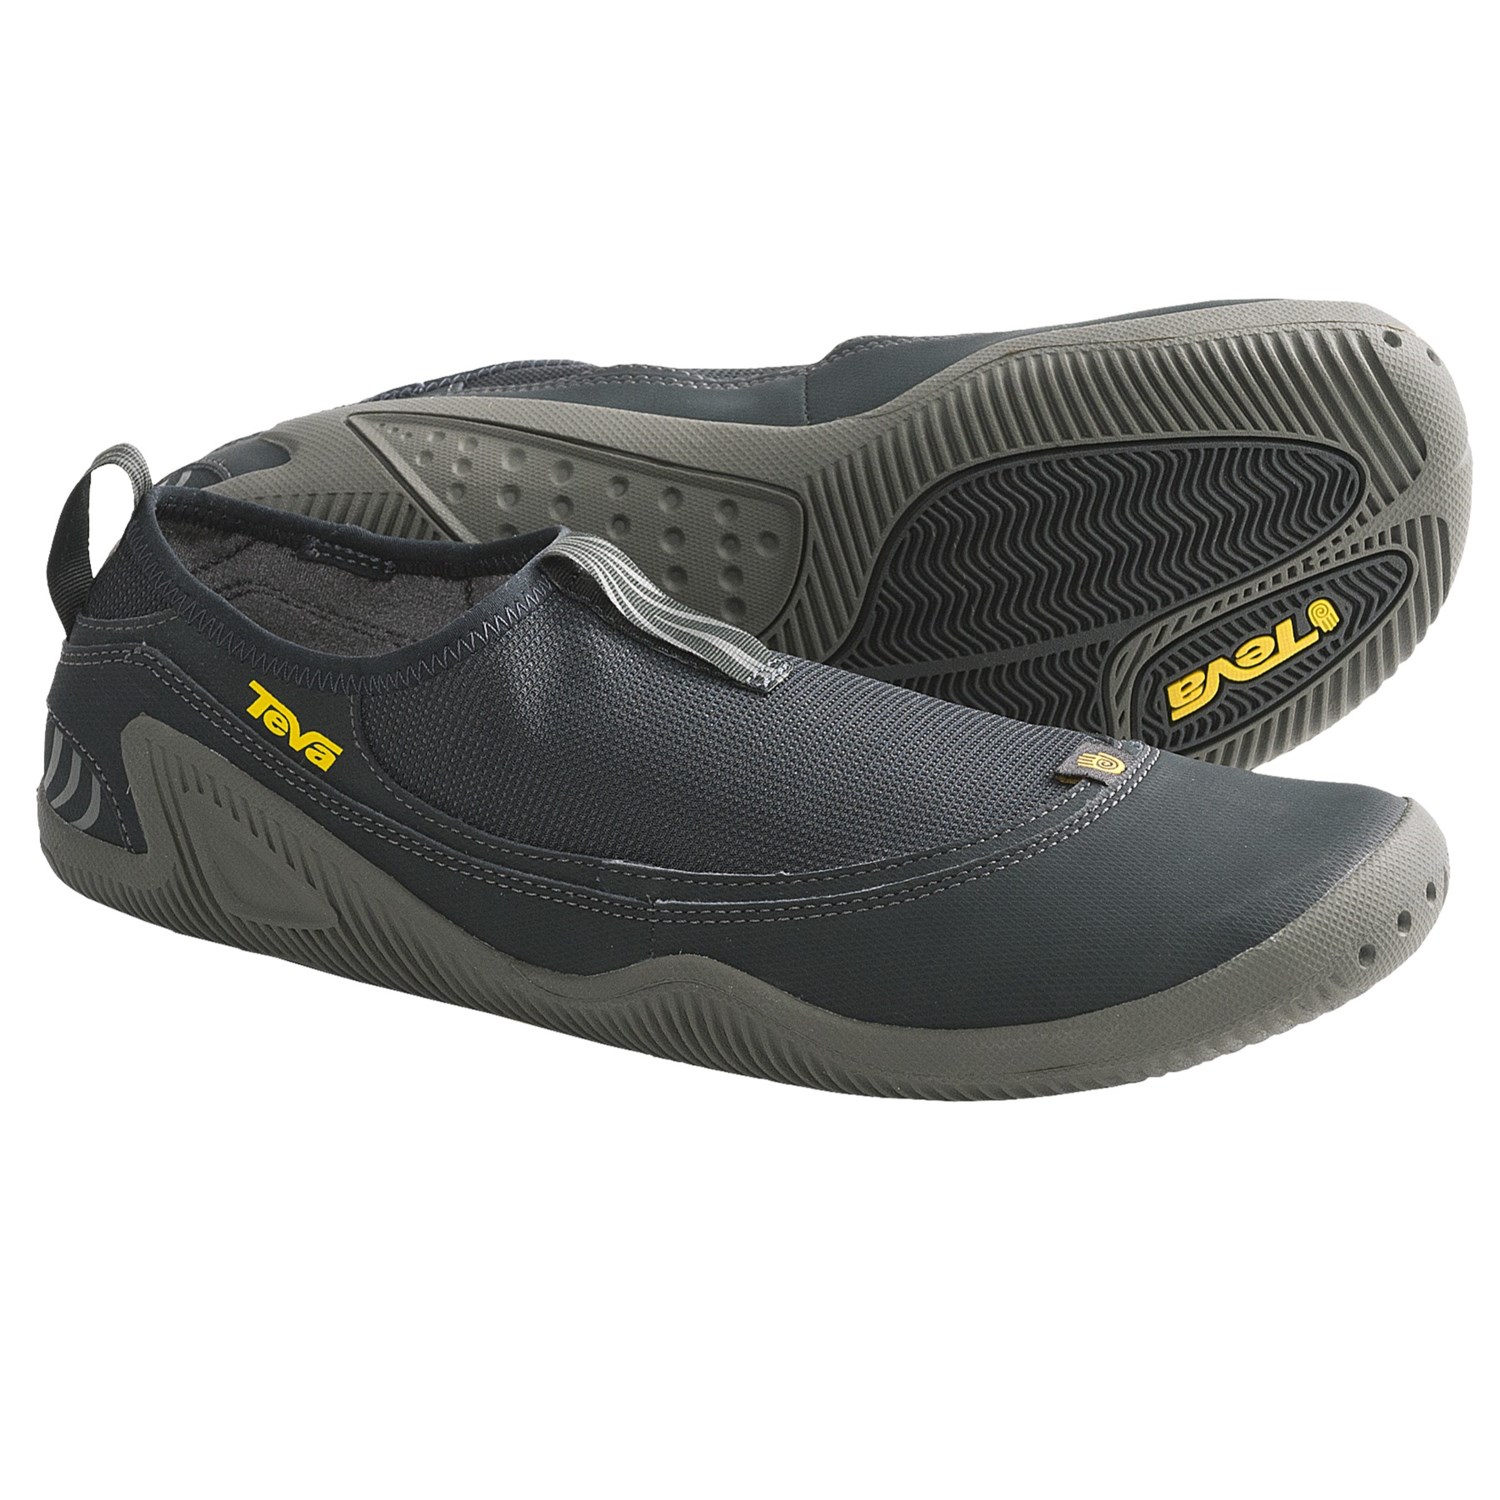 Teva Nilch Water Shoes (For Men) - Save 27%